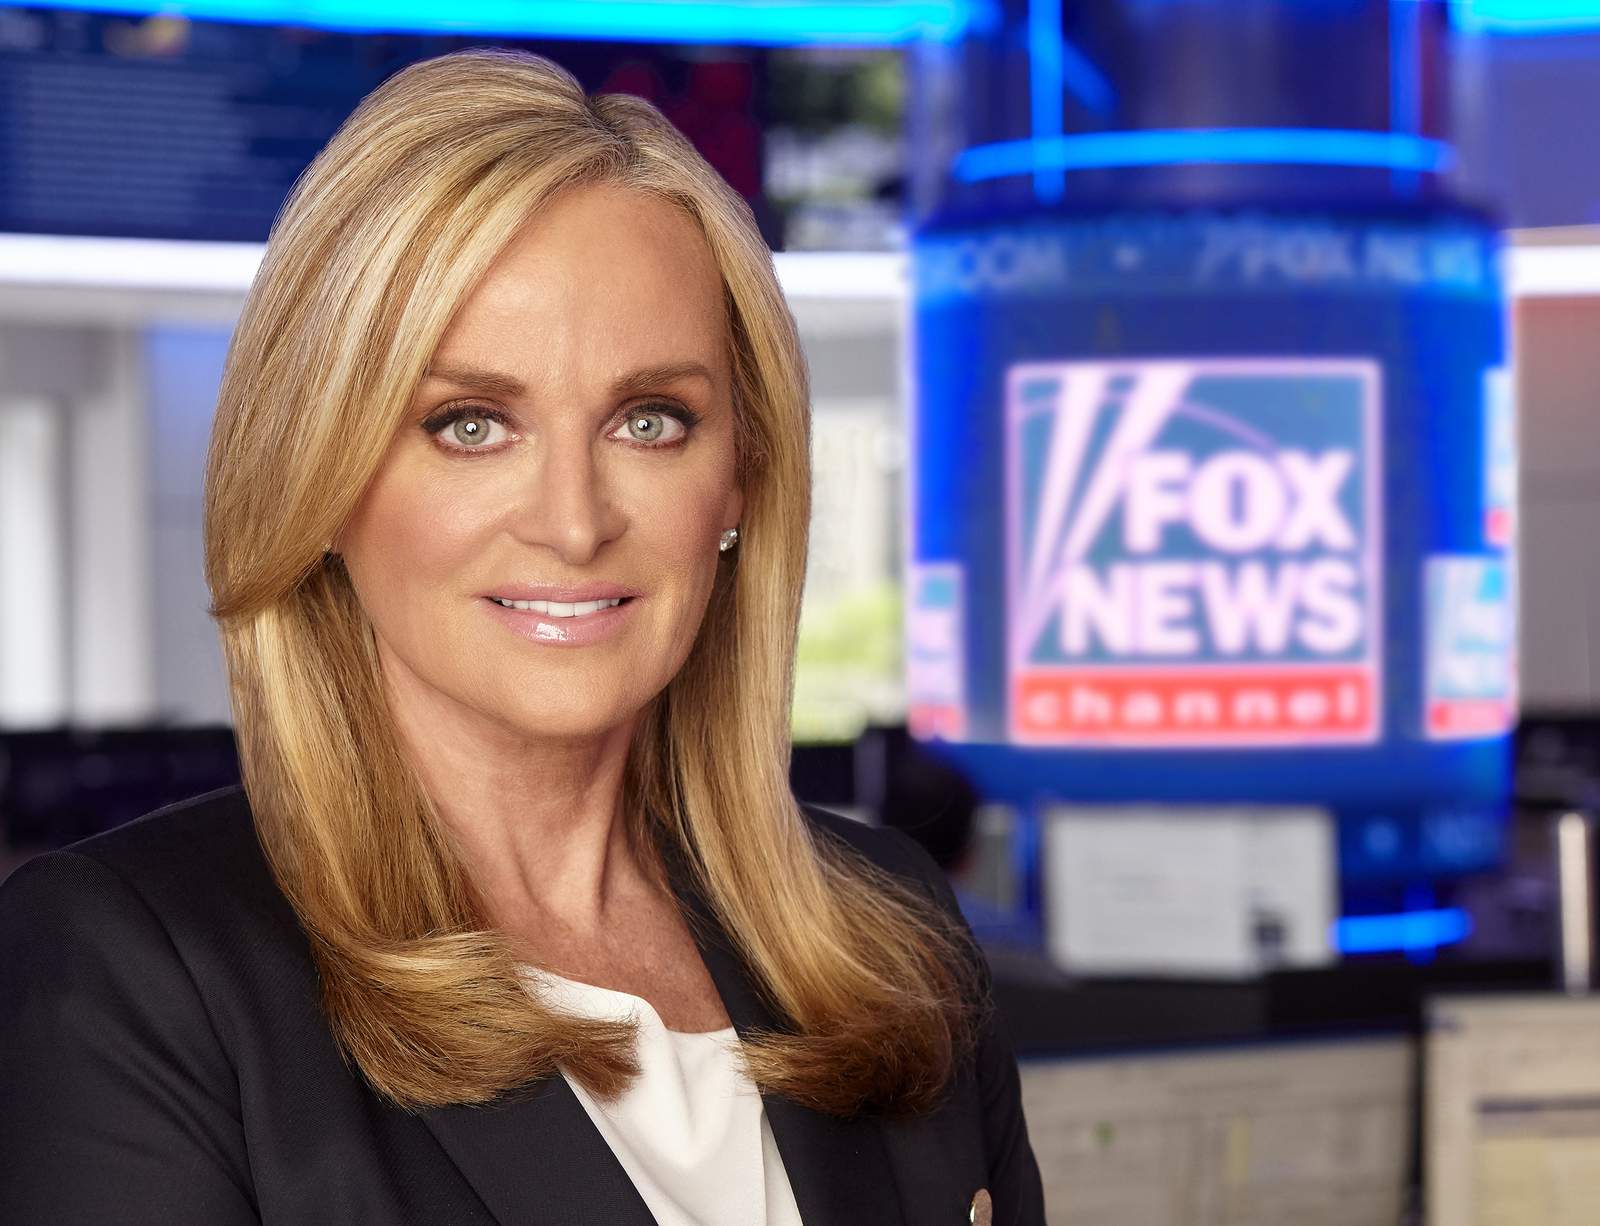 Fox News leader signs new contract, no ‘pivot’ planned